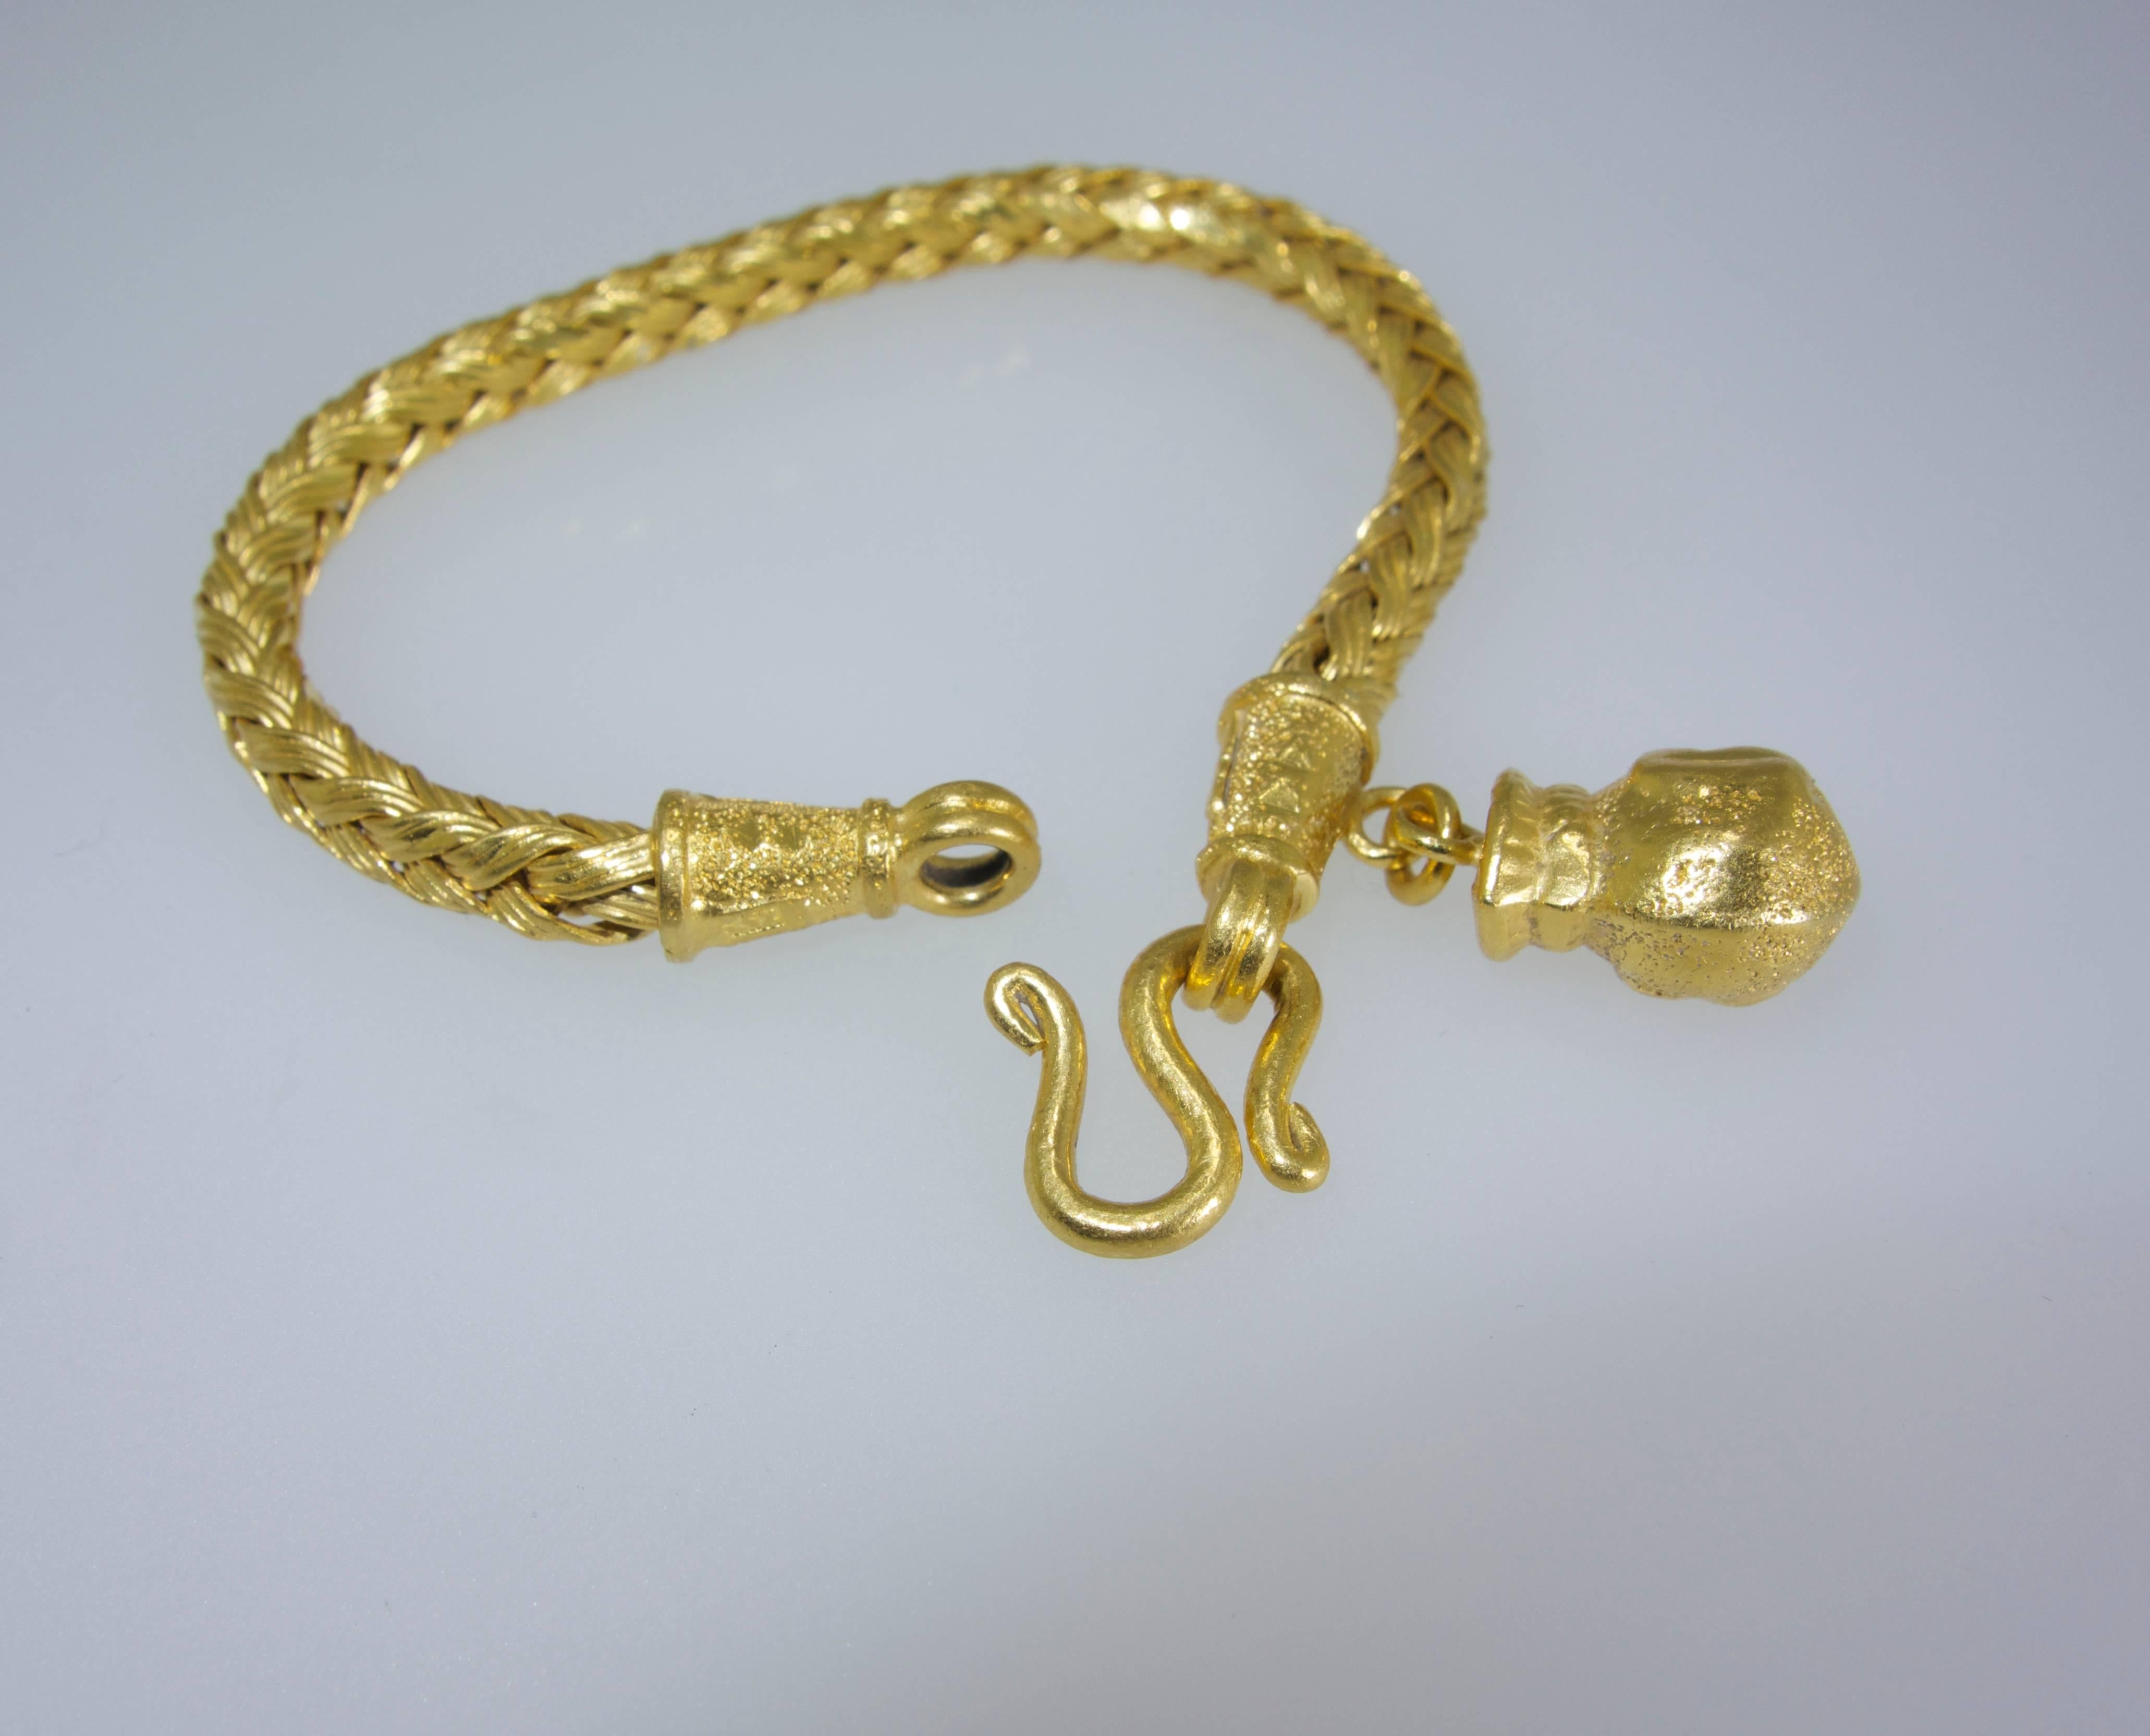 Probably over 22K yellow gold and weighing 30.3 grams, this braided bracelet with a "gold pot" motif charm is well made, flexible and versatile.  It is 6.5 inches long. 